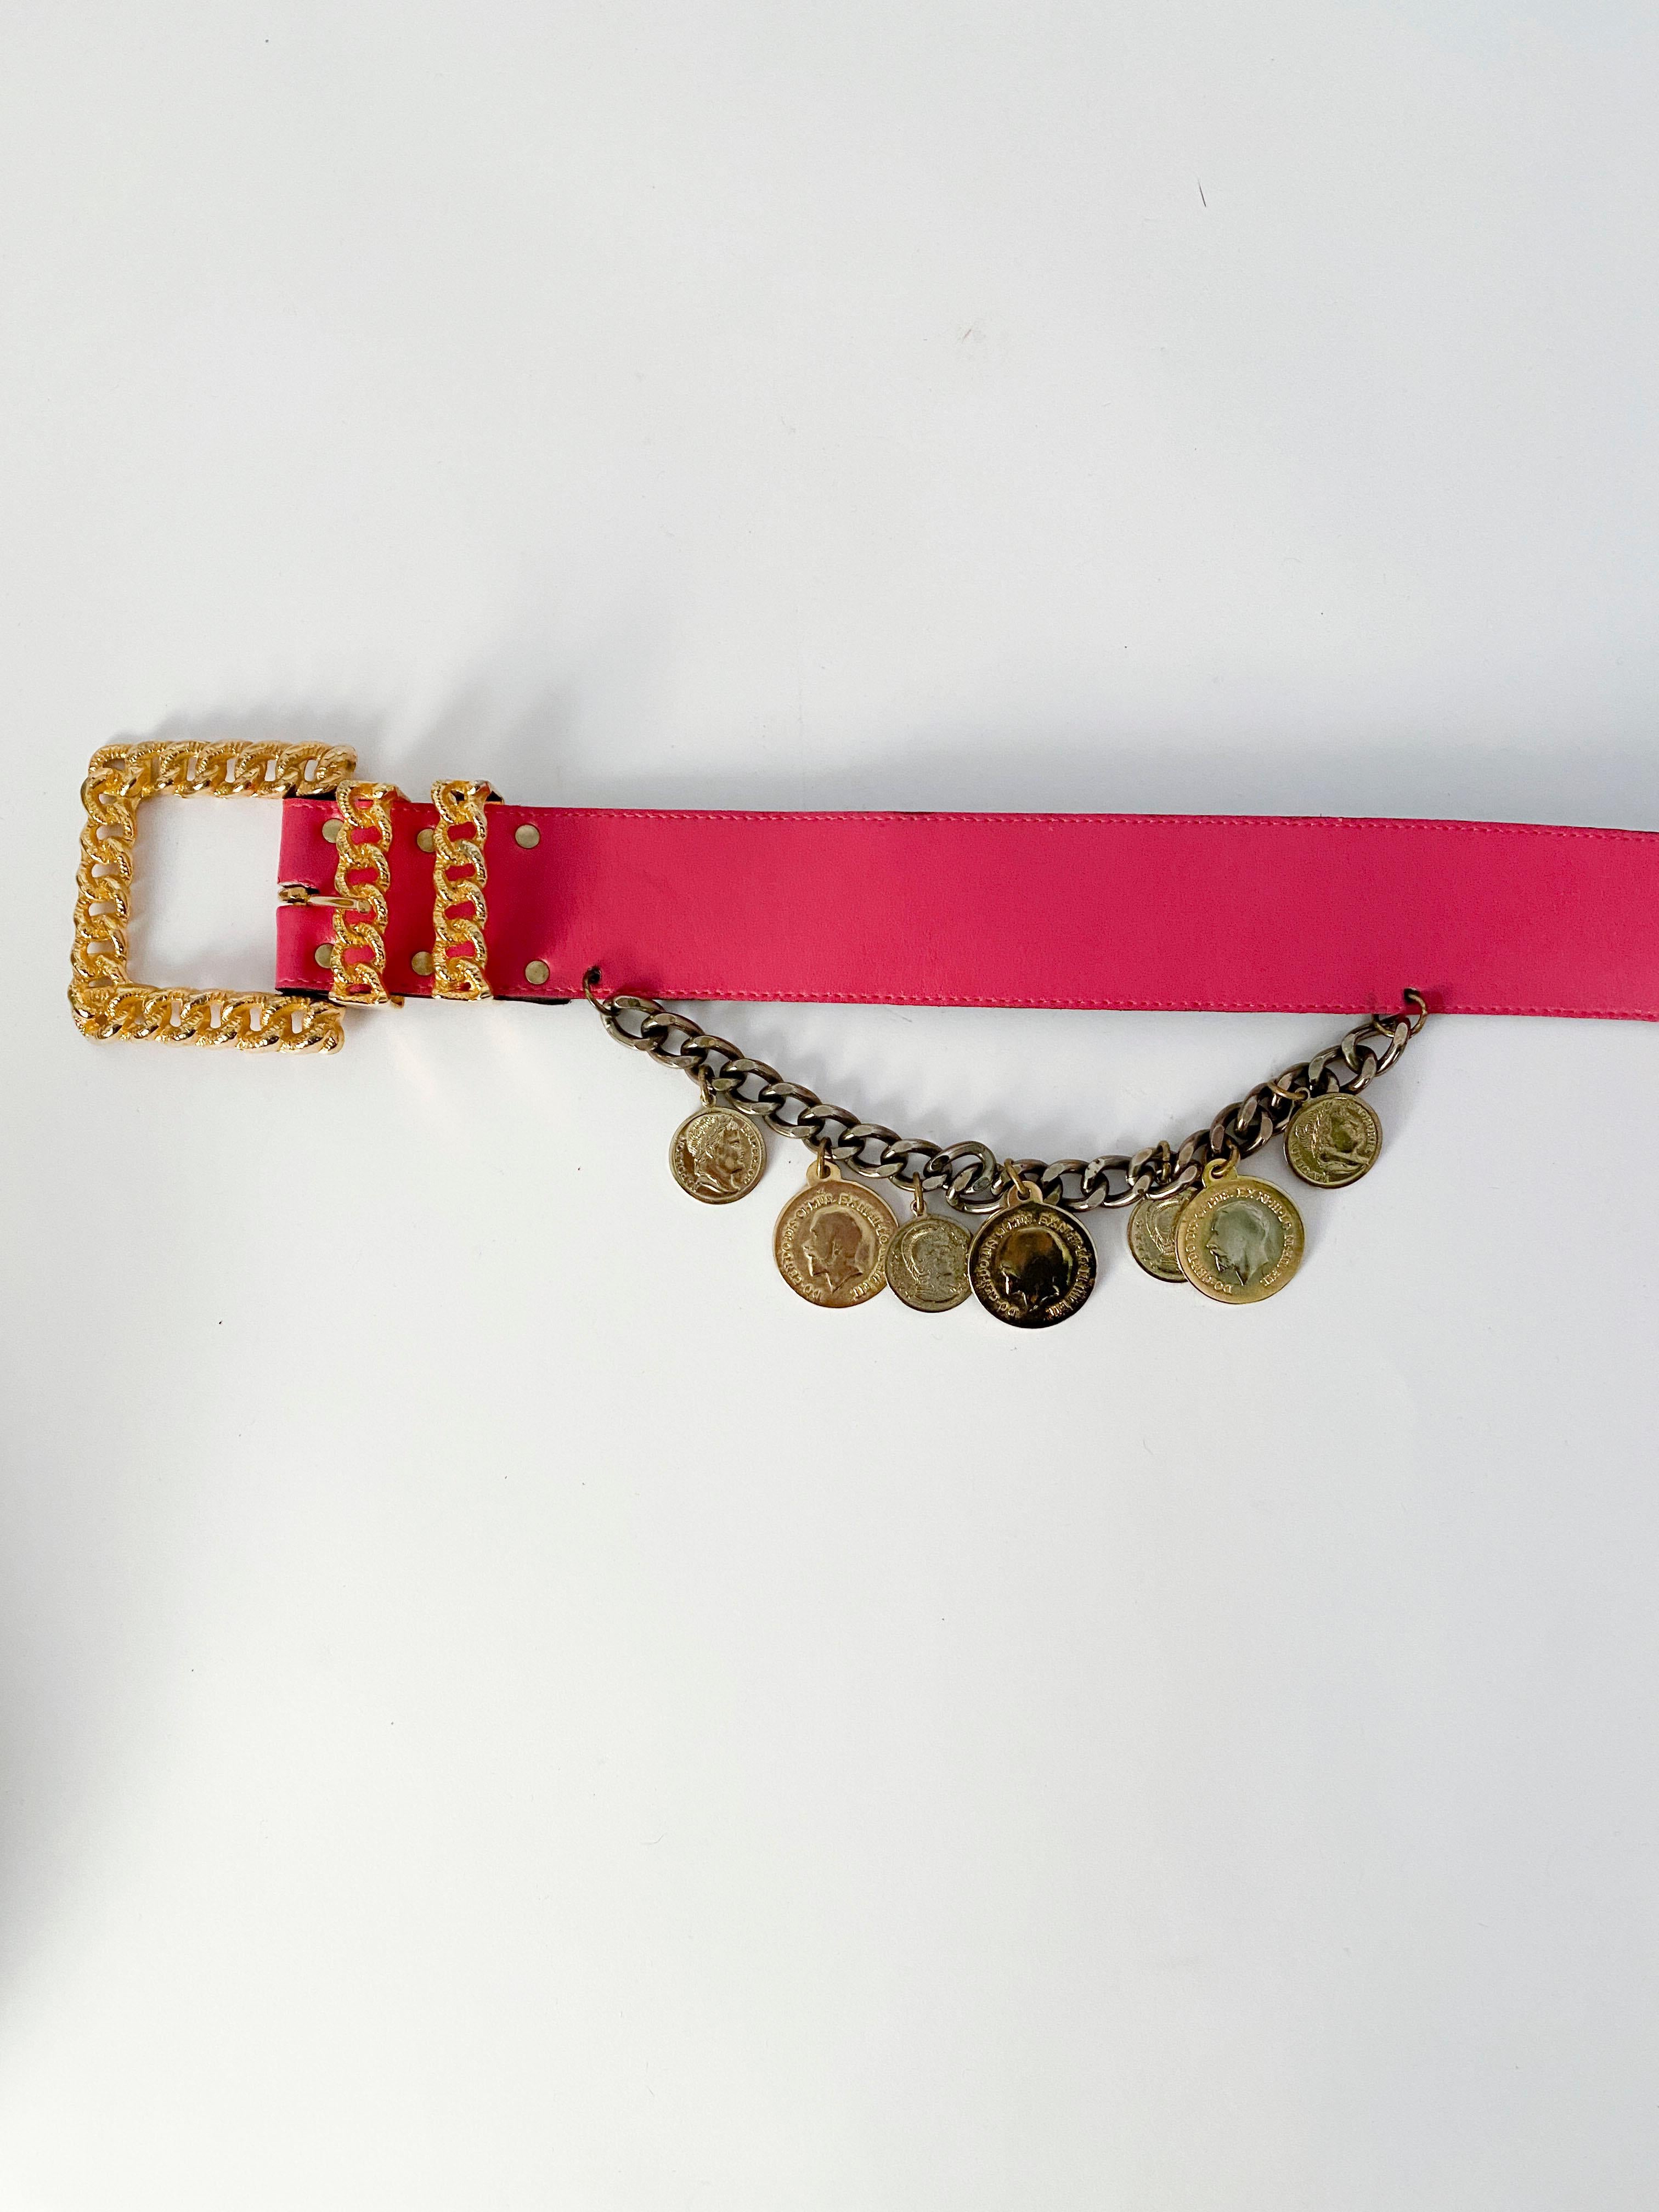 1980s Fucsia Elizabeth Arden leather wide belt with a gold tone chain adorned with polished coins.